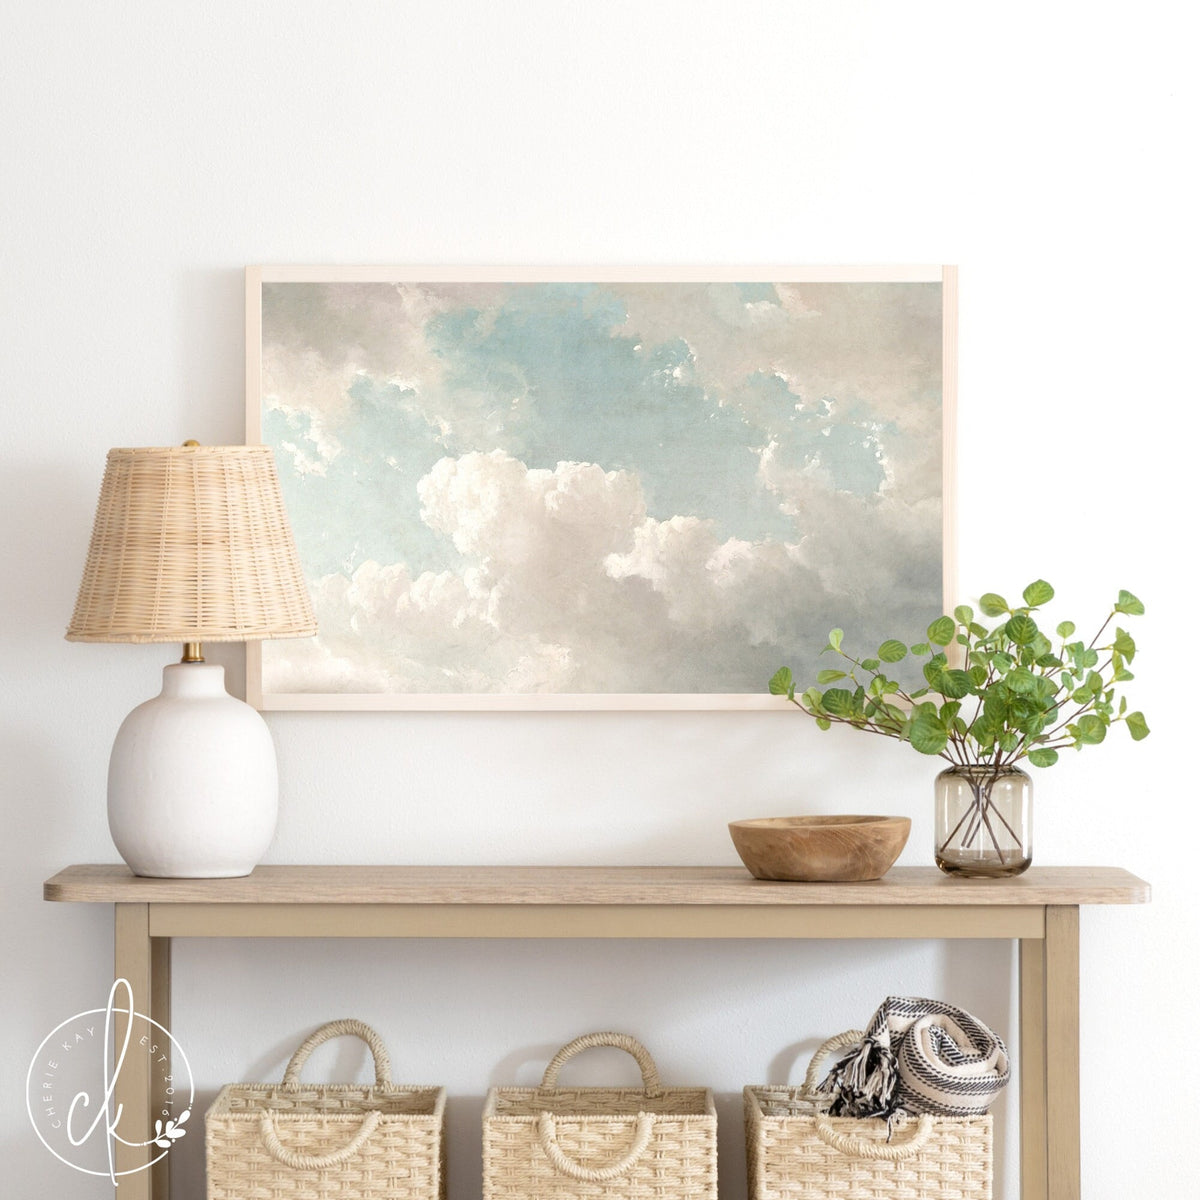 Clouds and Sky Painting | Vintage Wall Art | Framed Wall Art | Landscape Painting | Living Room Decor | Bedroom Decor